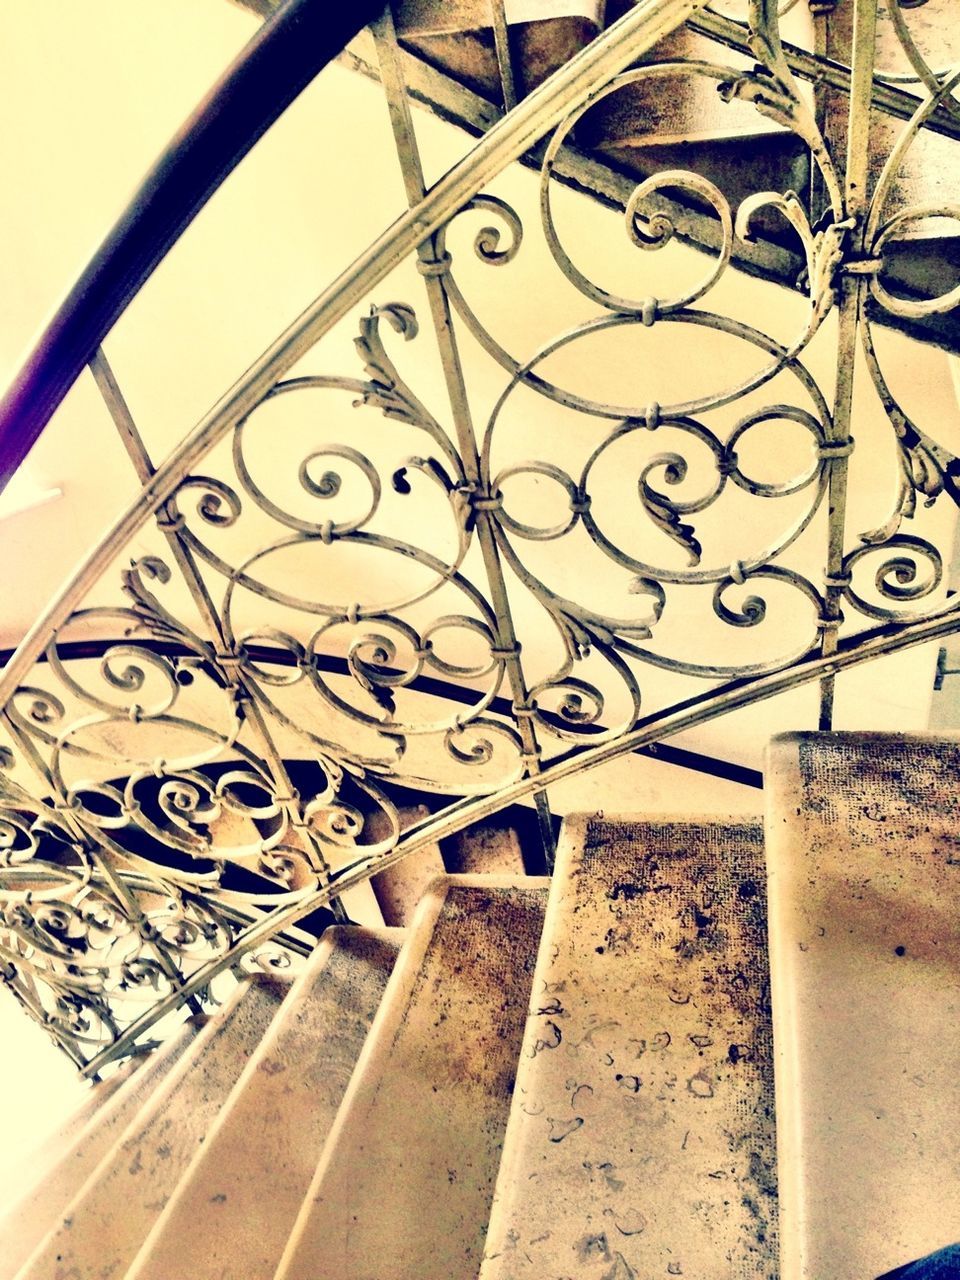 metal, design, pattern, indoors, built structure, creativity, art and craft, close-up, architecture, art, railing, wall - building feature, metallic, graffiti, day, no people, steps, sunlight, staircase, steps and staircases